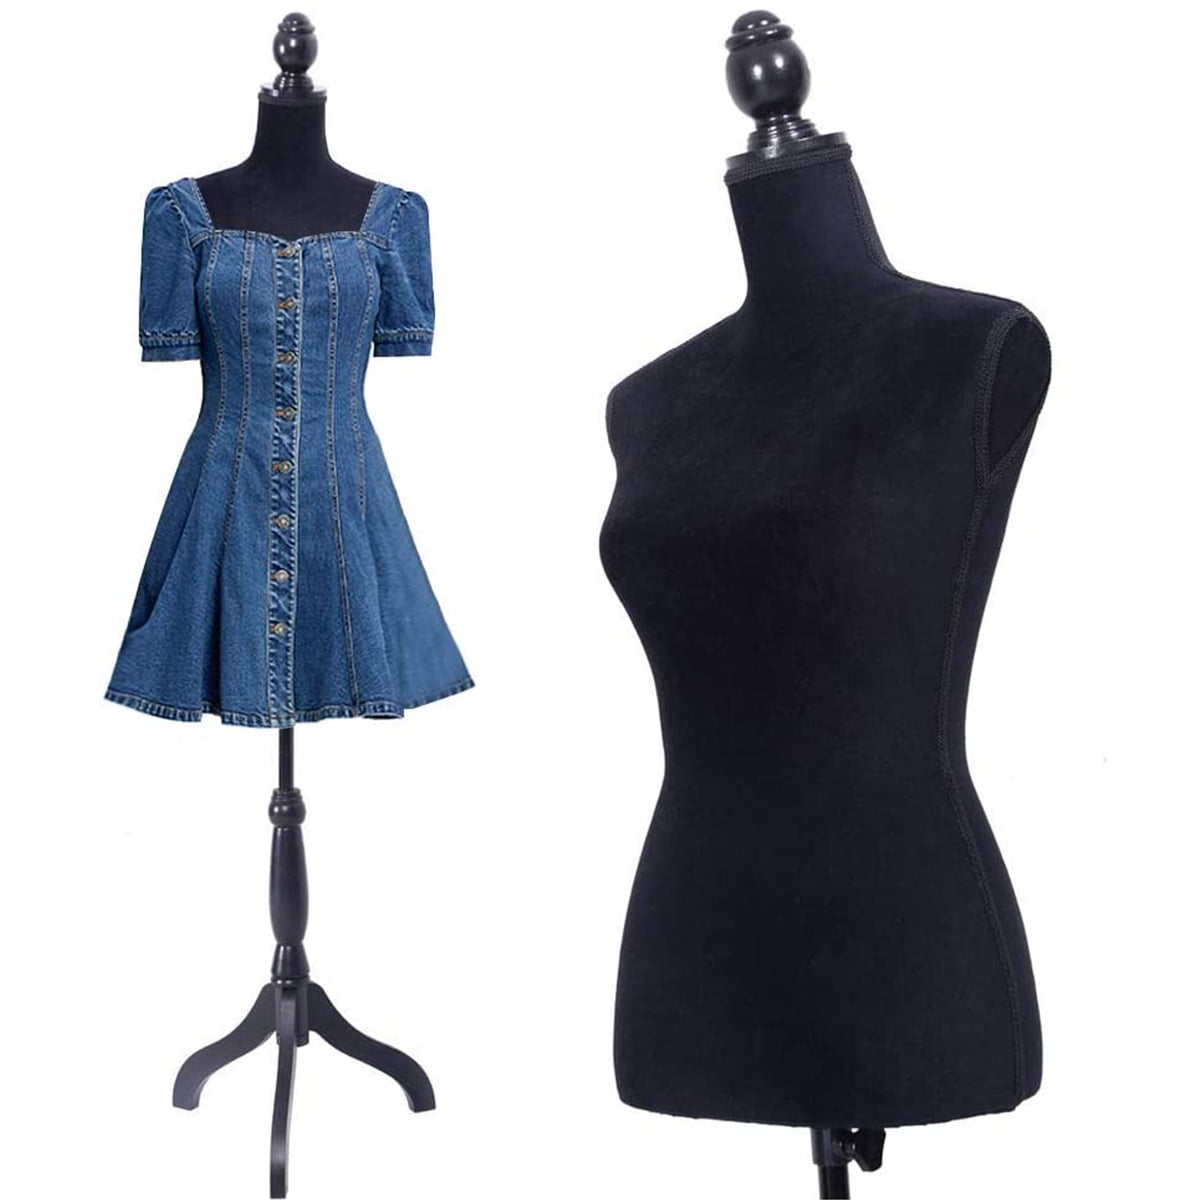 Details about   Half-Length Lady Model Female Mannequin Torso Shop Clothing Display Tripod Stand